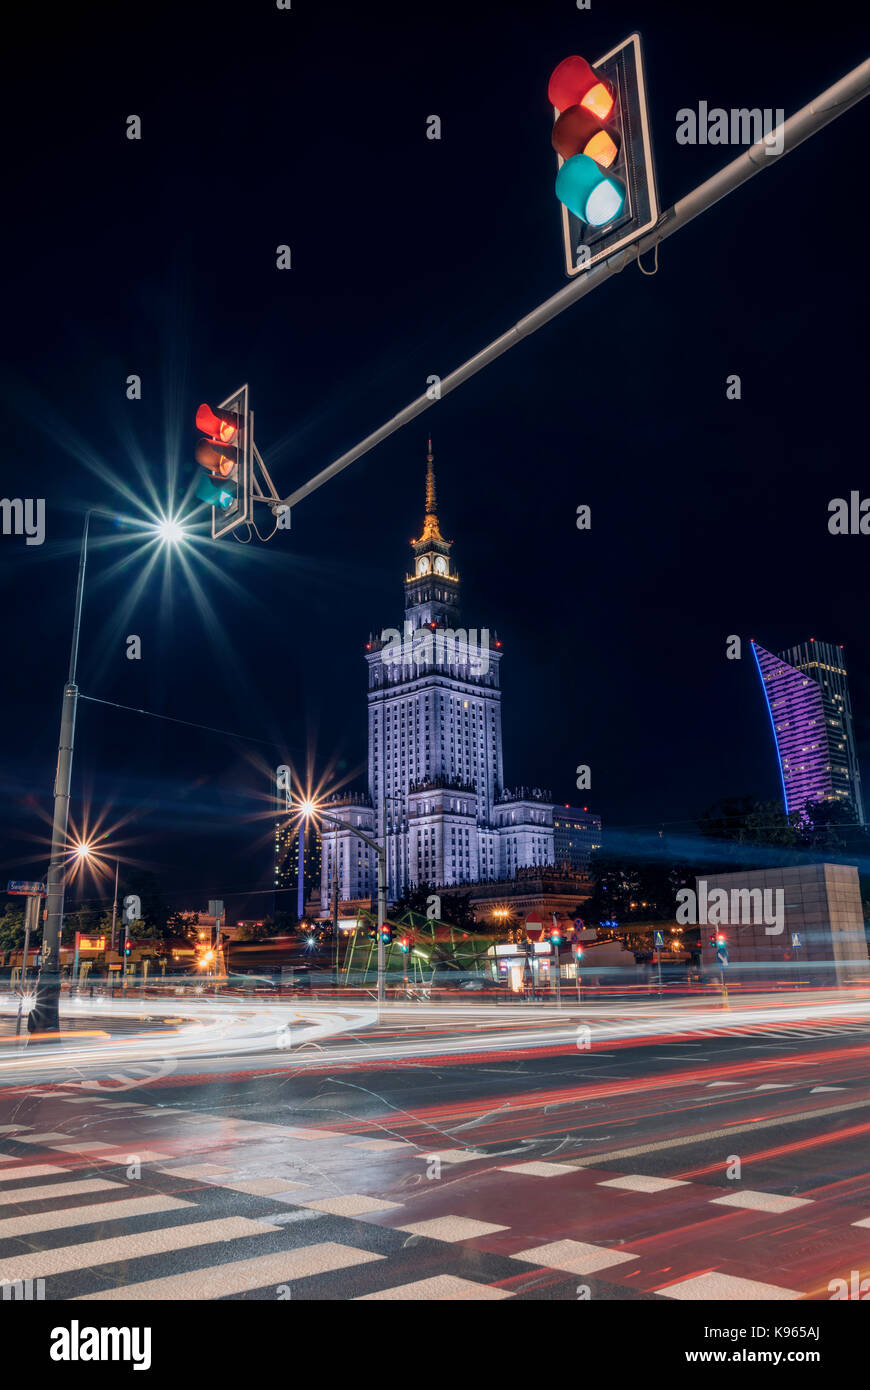 Palace of Culture and Science in Warsaw. In foreground busy street at night. Long exposure photo Stock Photo